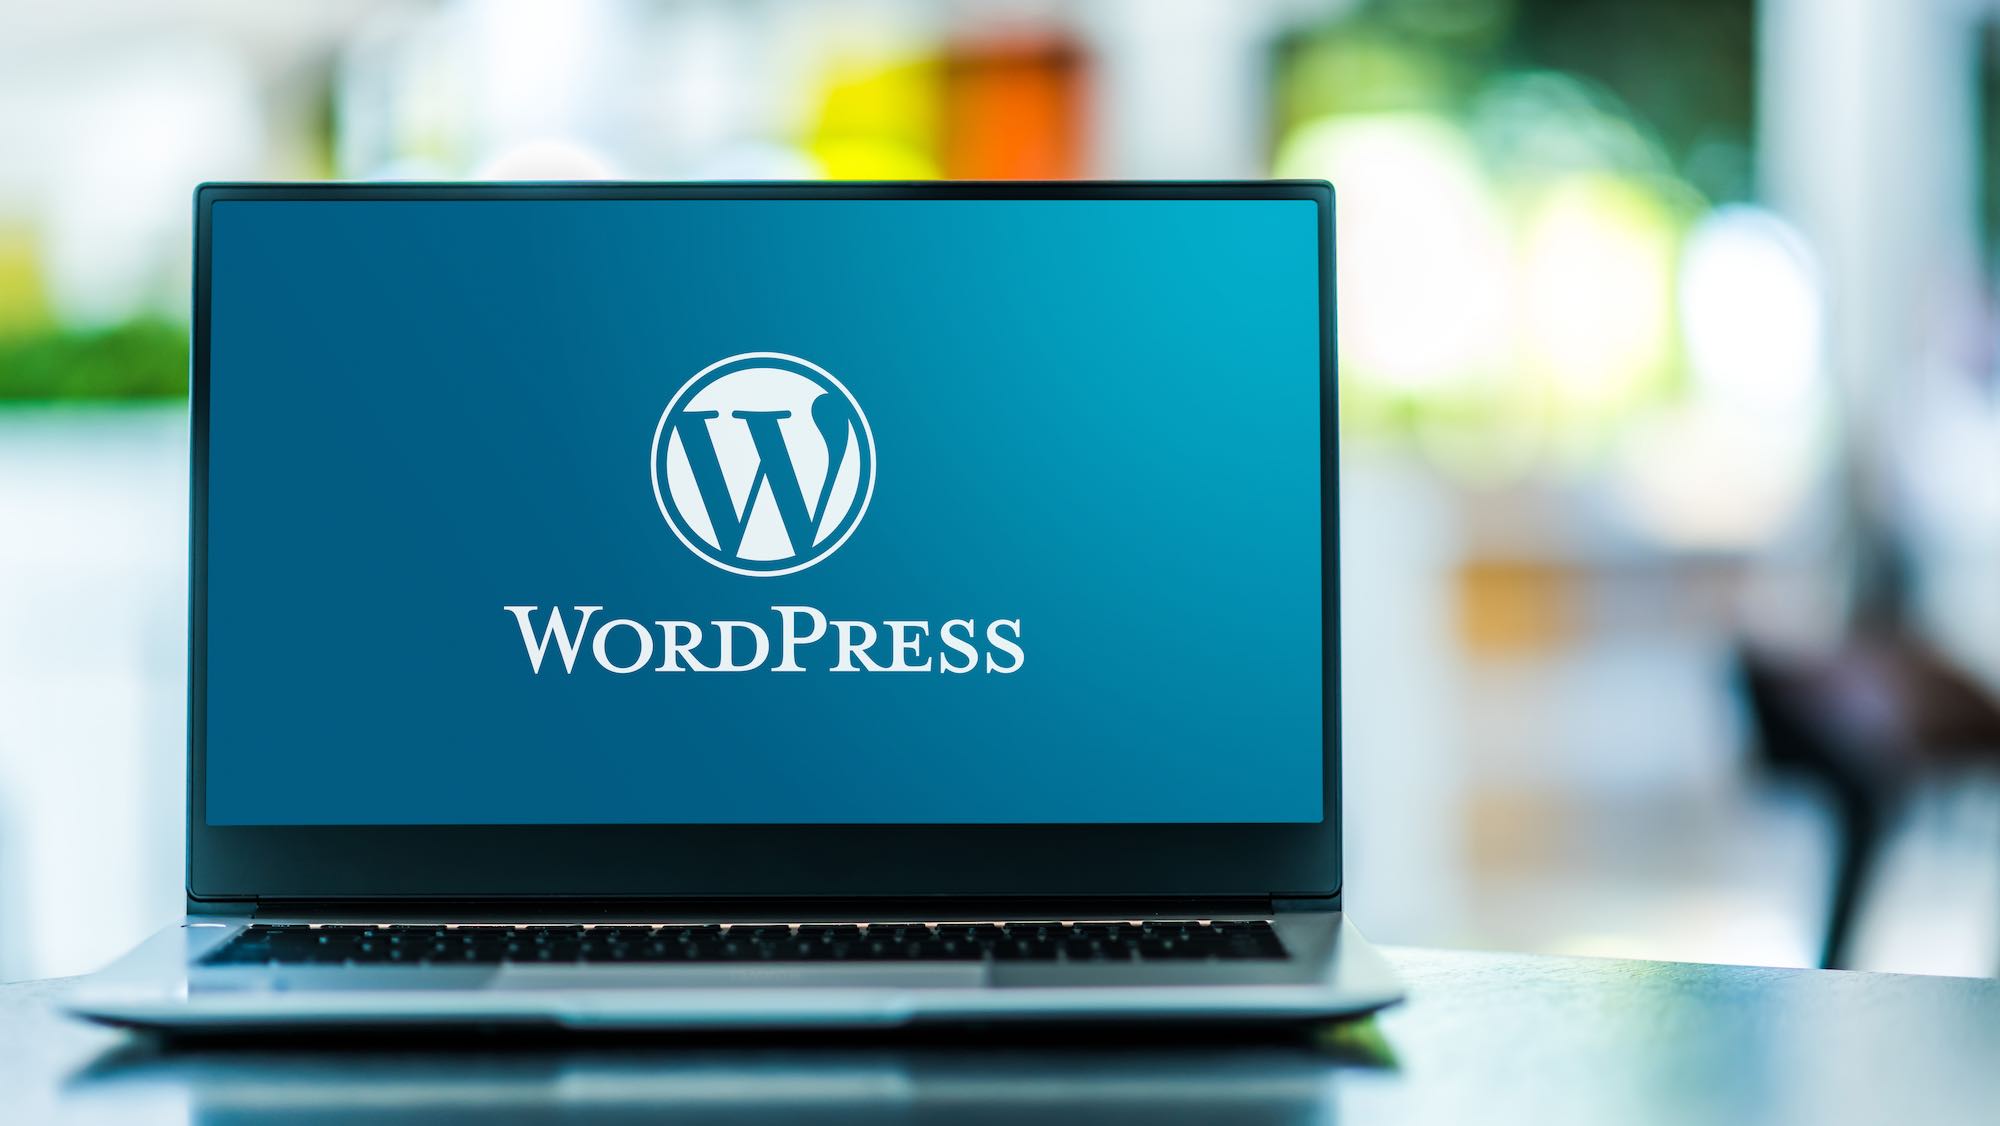 WordPress.org vs. WordPress.com: Which One Is Better for Doctors?